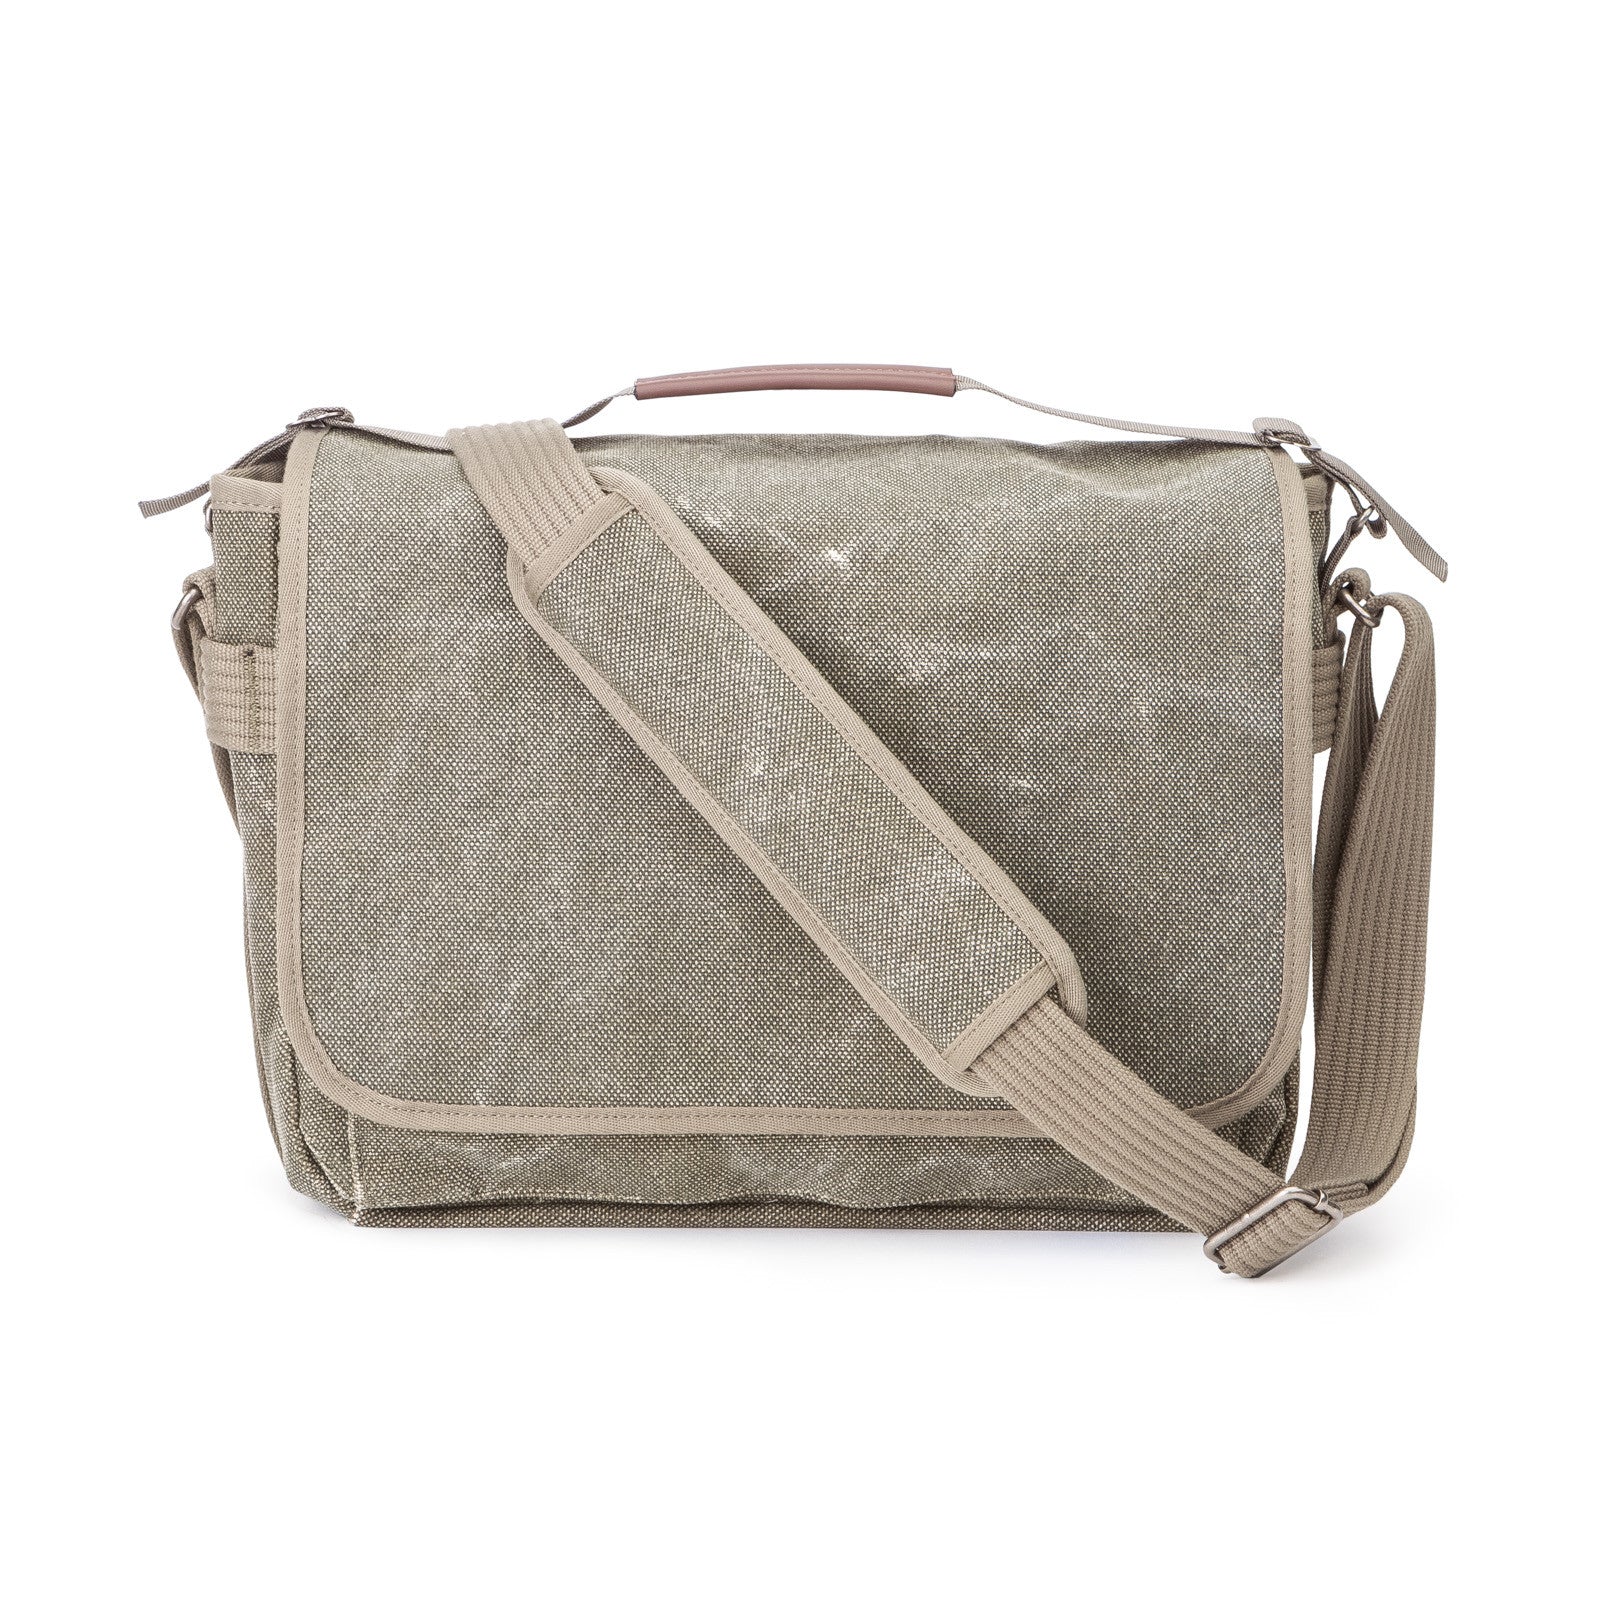 Sienna - Contemporary laptop tote – Lawful London